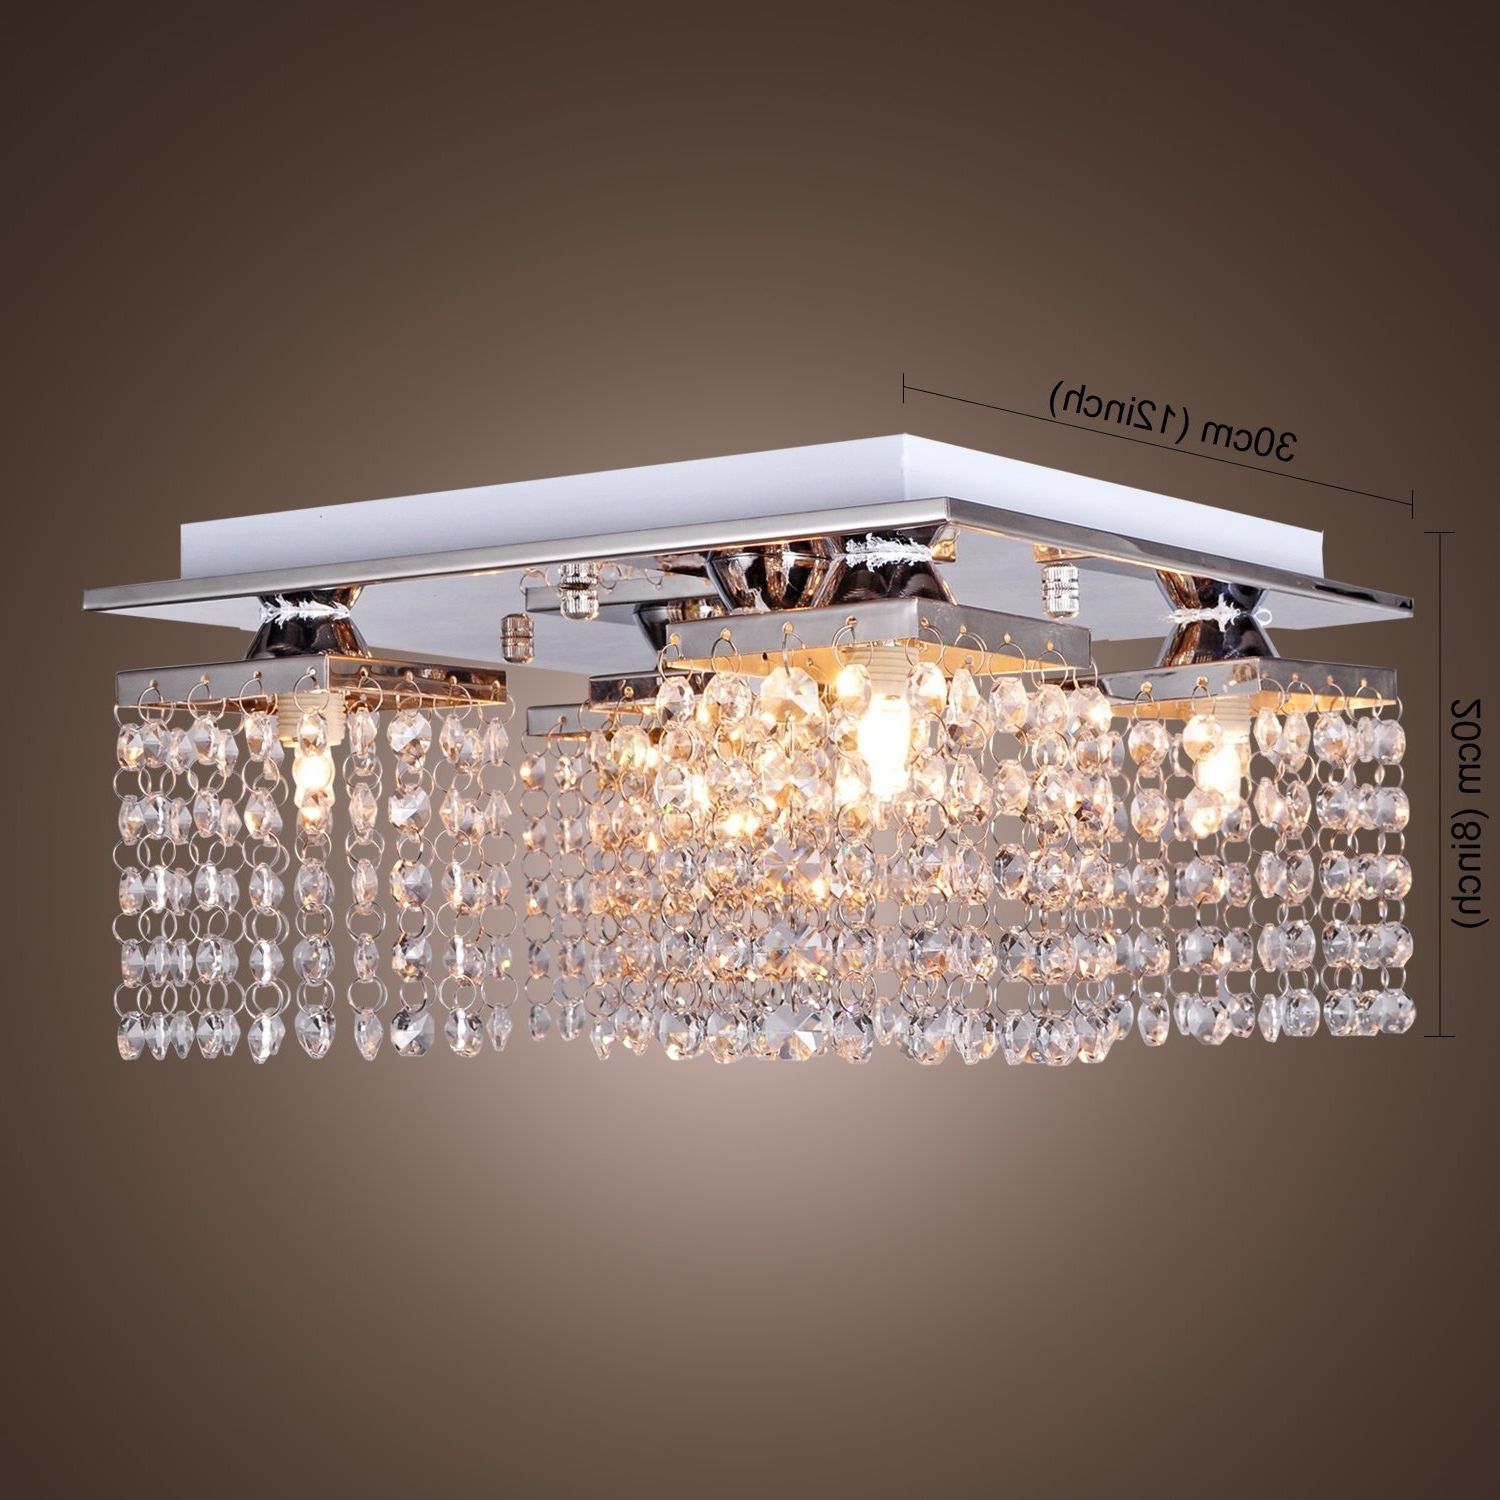 Most Recent Lightinthebox Crystal Ceiling Light With 5 Lights Electroplated Intended For Modern Chandeliers For Low Ceilings (View 1 of 15)